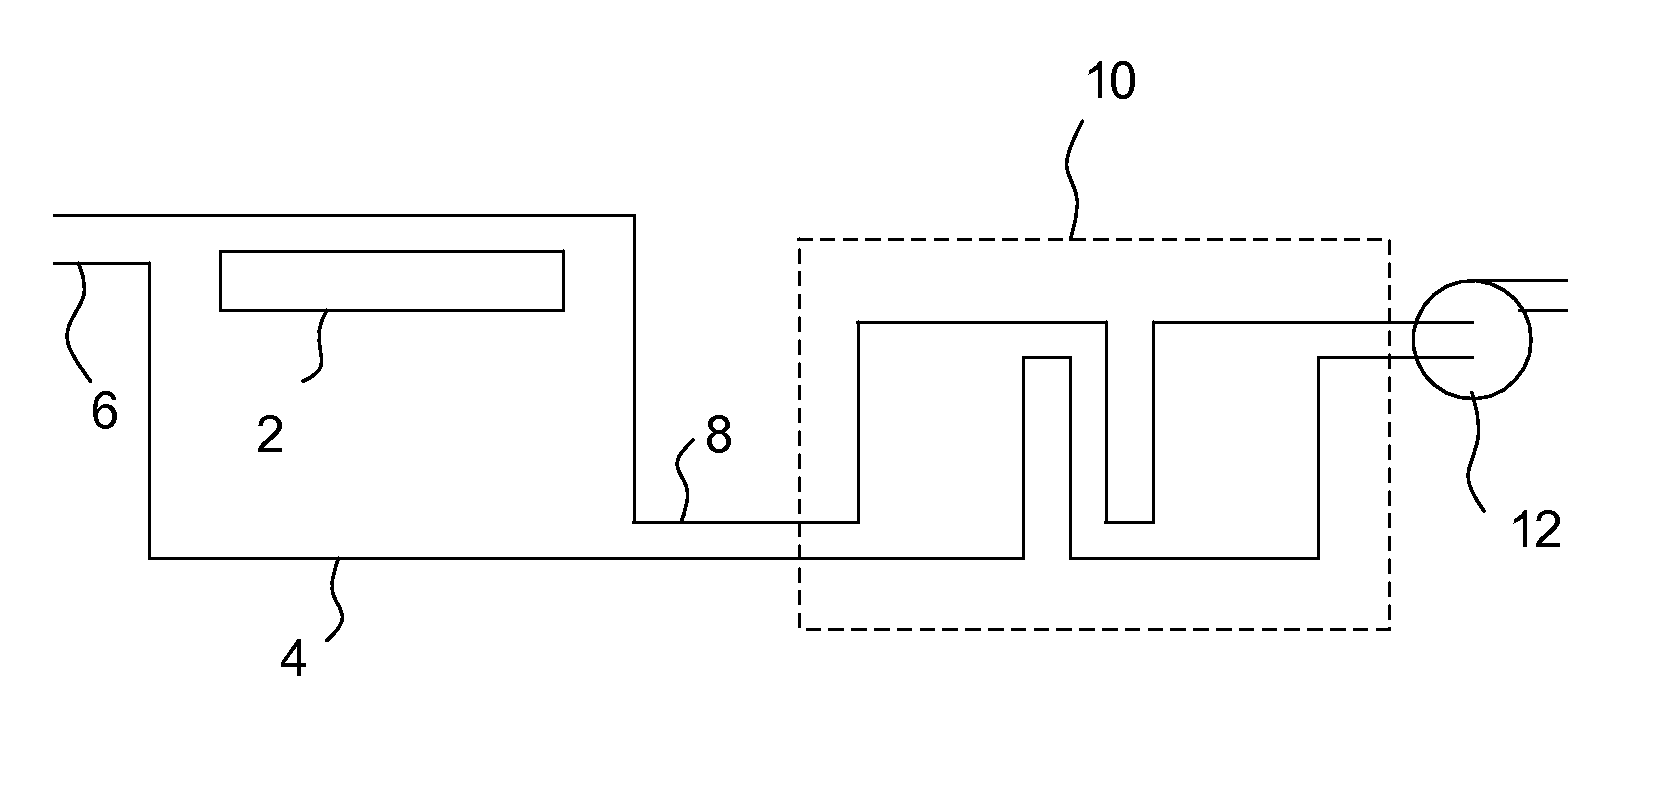 METHOD FOR REMOVING VOLATILE ORGANIC COMPOUNDS (VOCs) FROM AN AIR STREAM